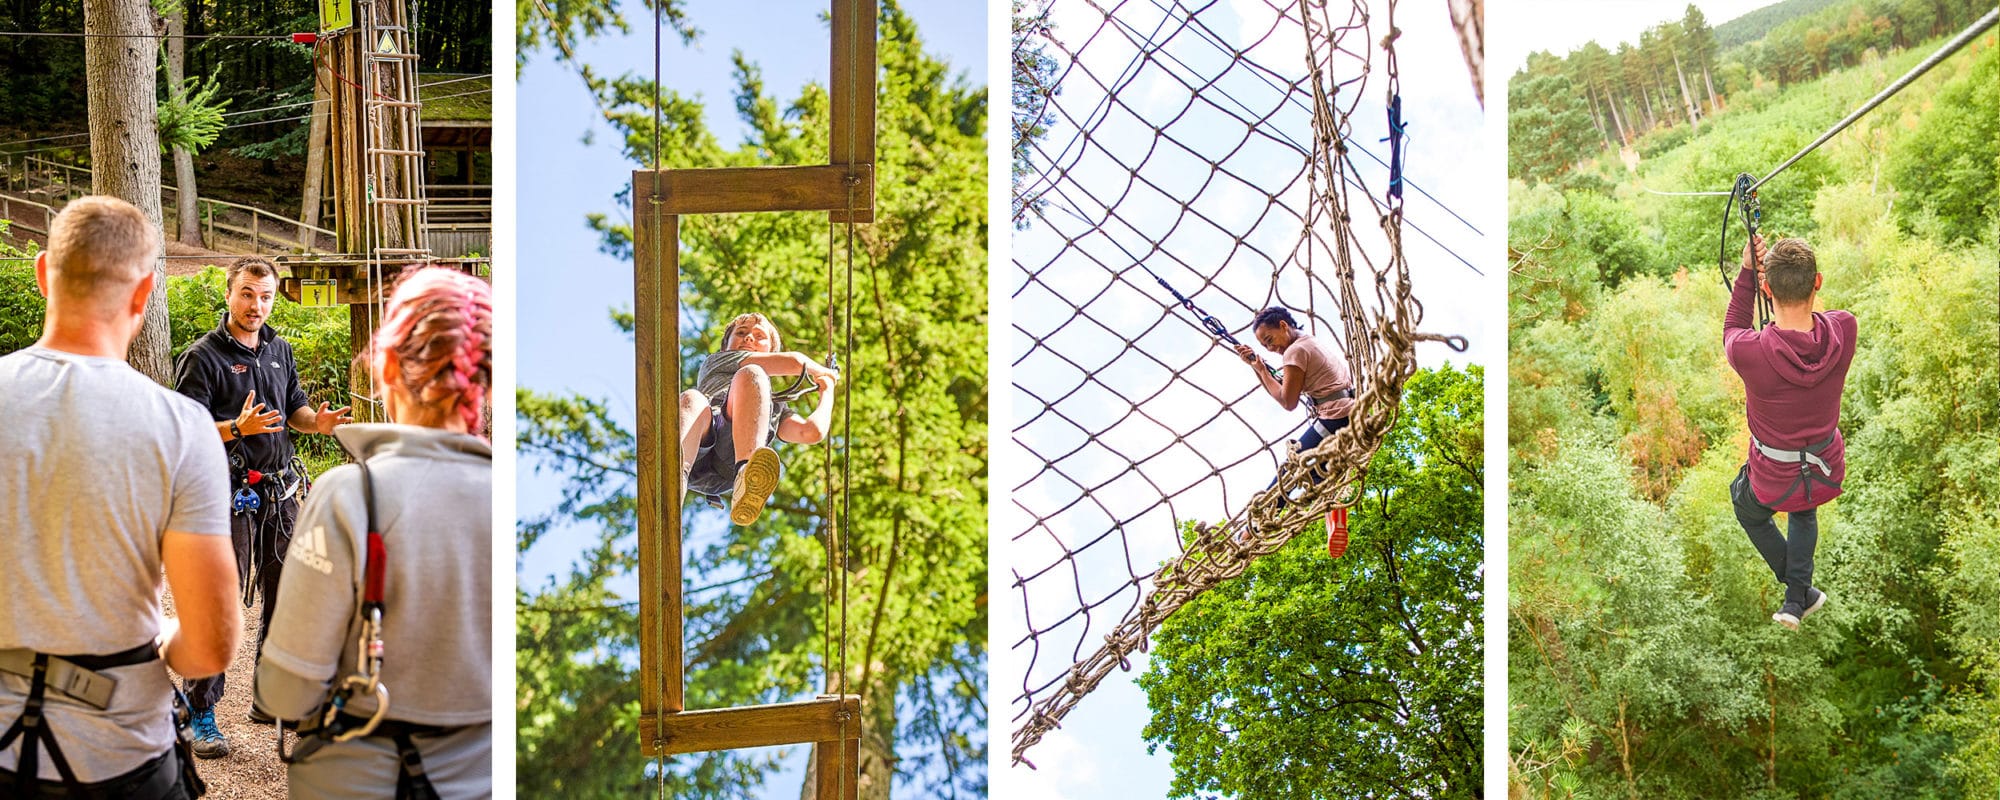 Go Ape Our Adventures Learn About Our Treetop Adventures